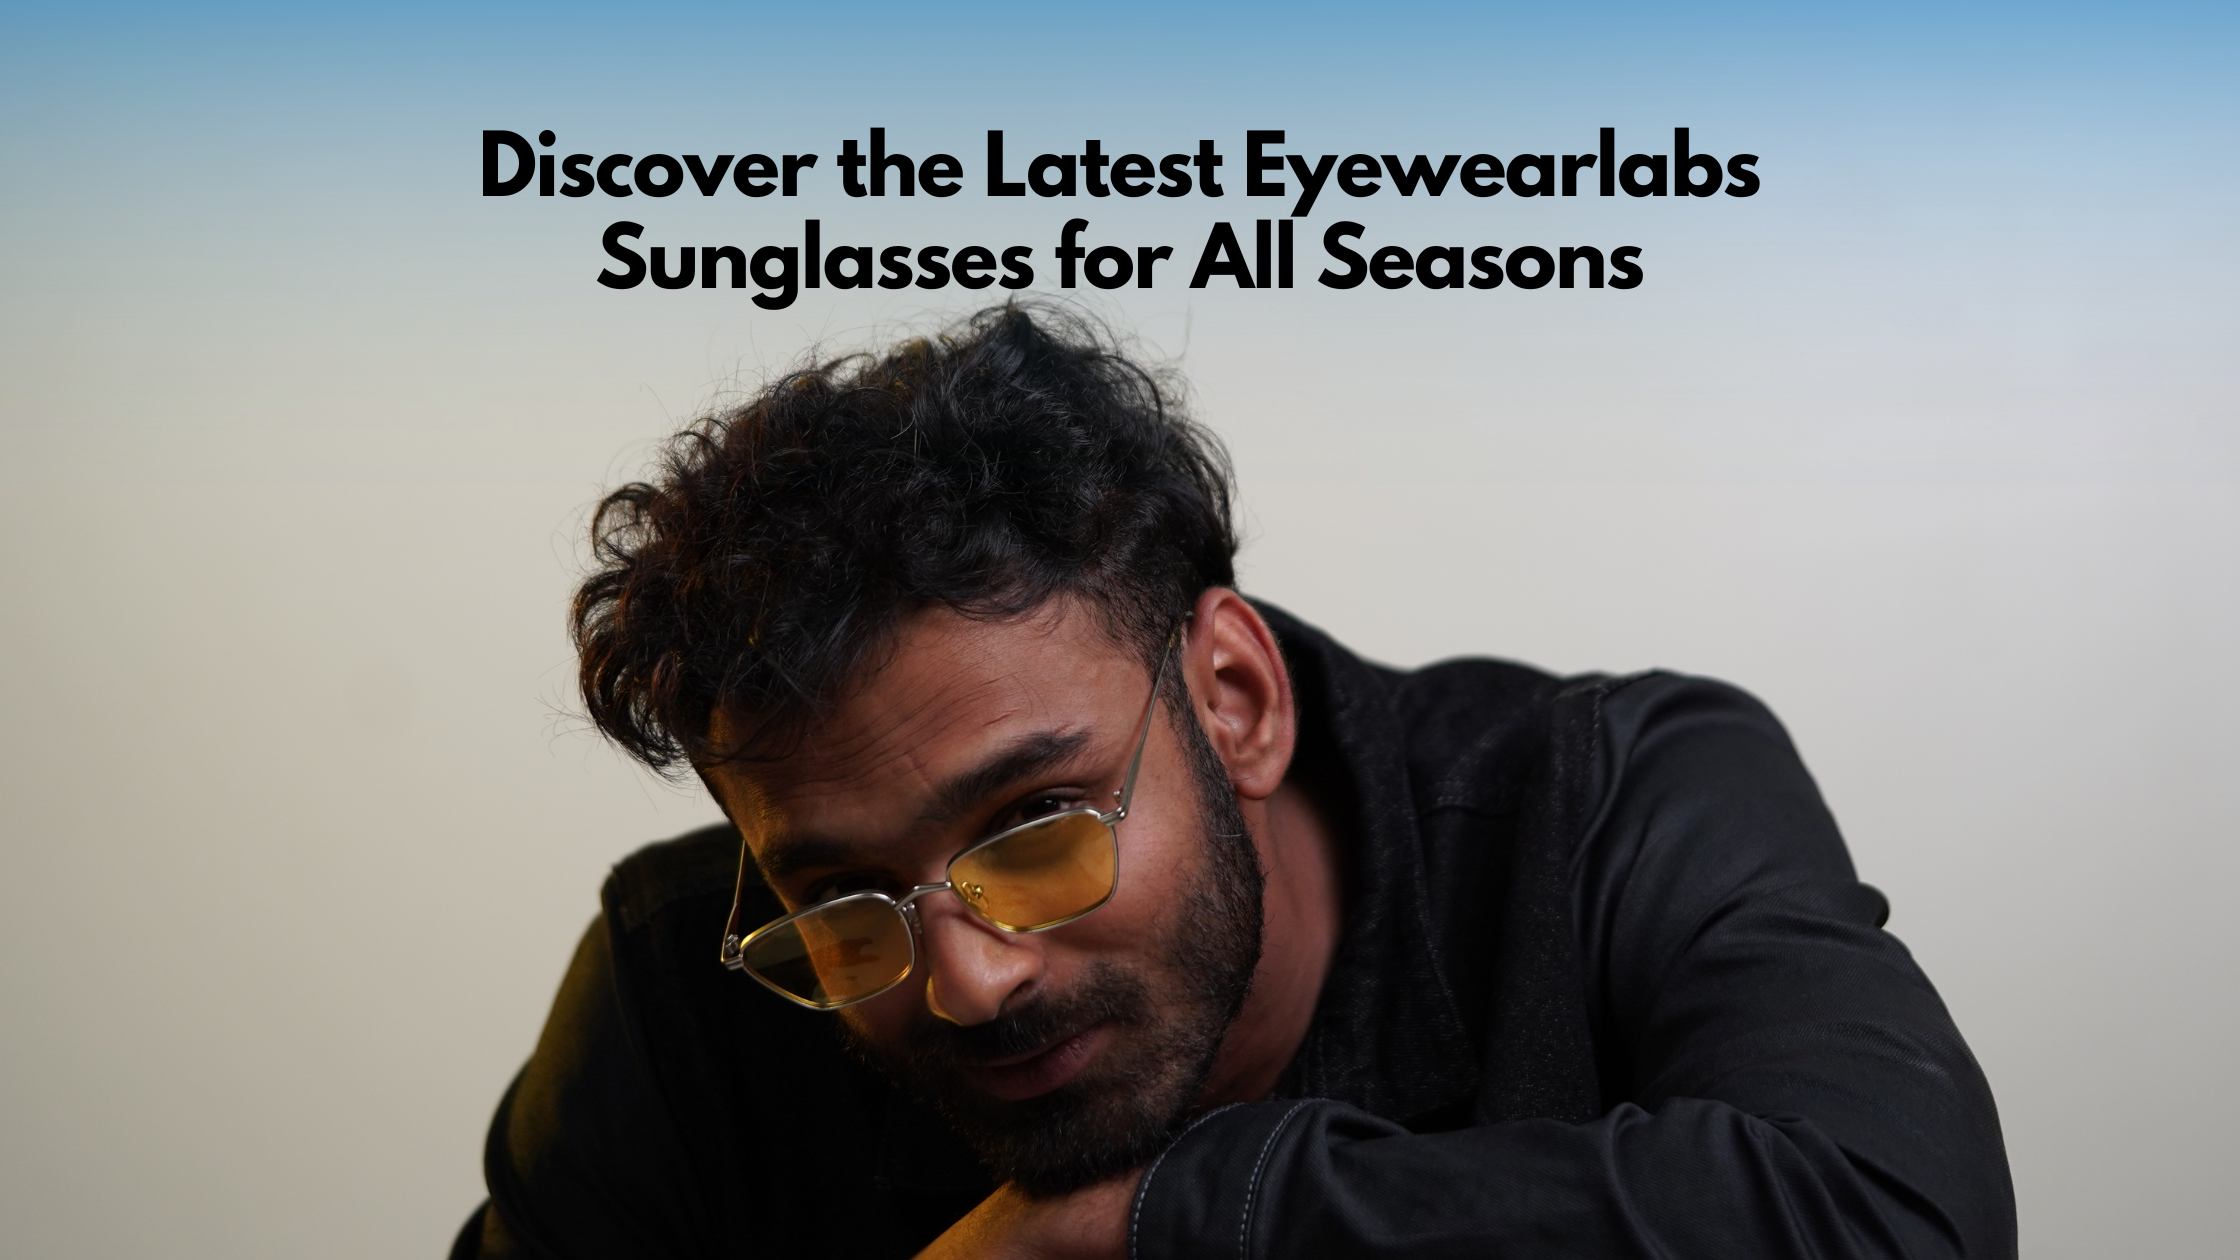 Discover the Latest Eyewearlabs Sunglasses for All Seasons